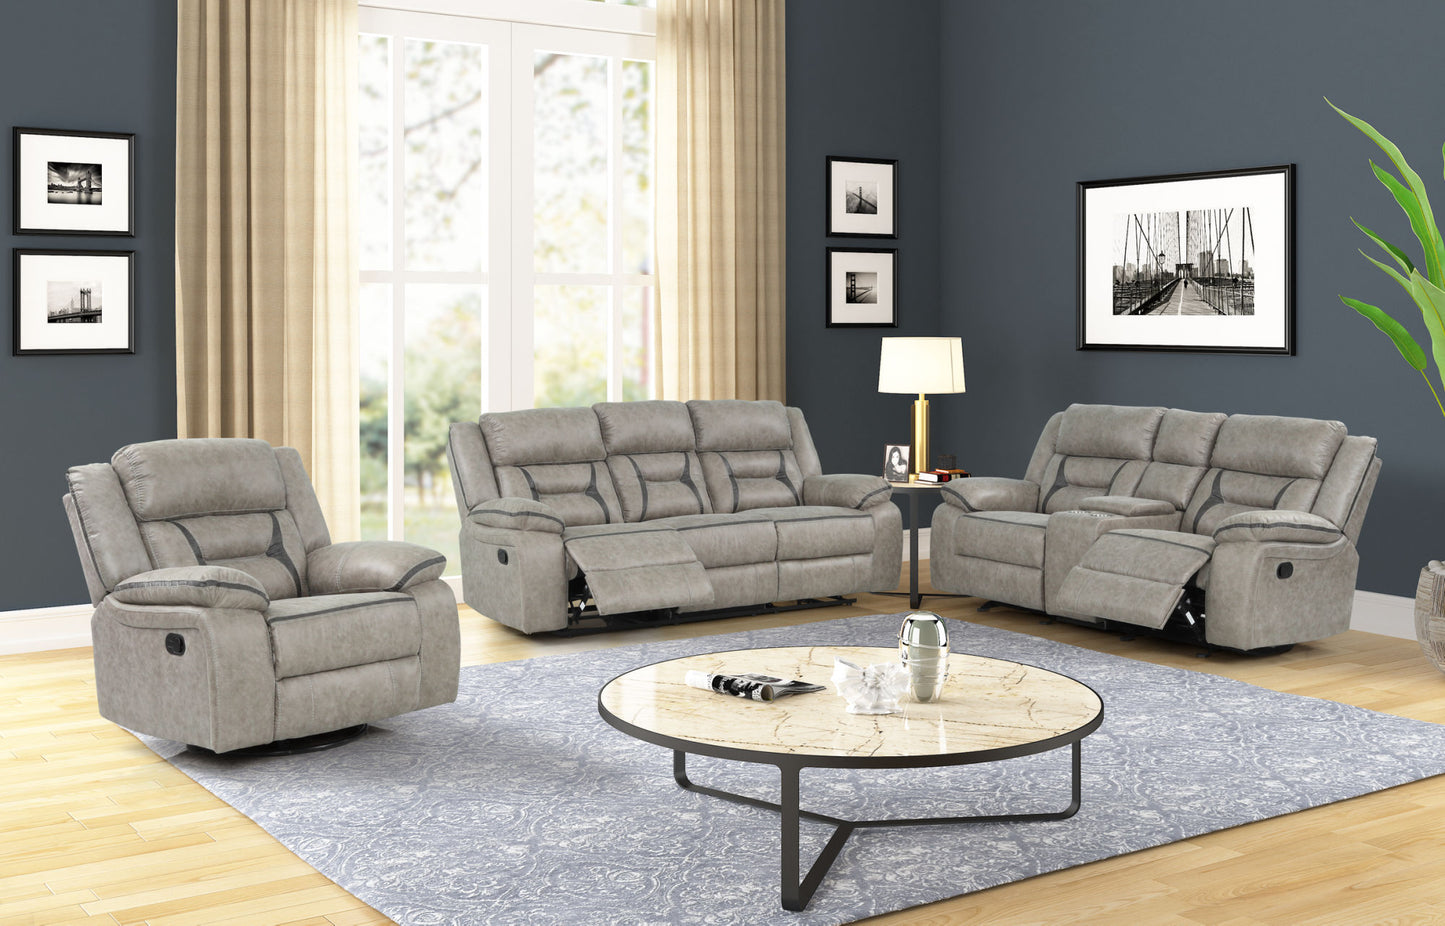 Denali Faux Leather Upholstered Sofa Made With Wood Finished in Gray